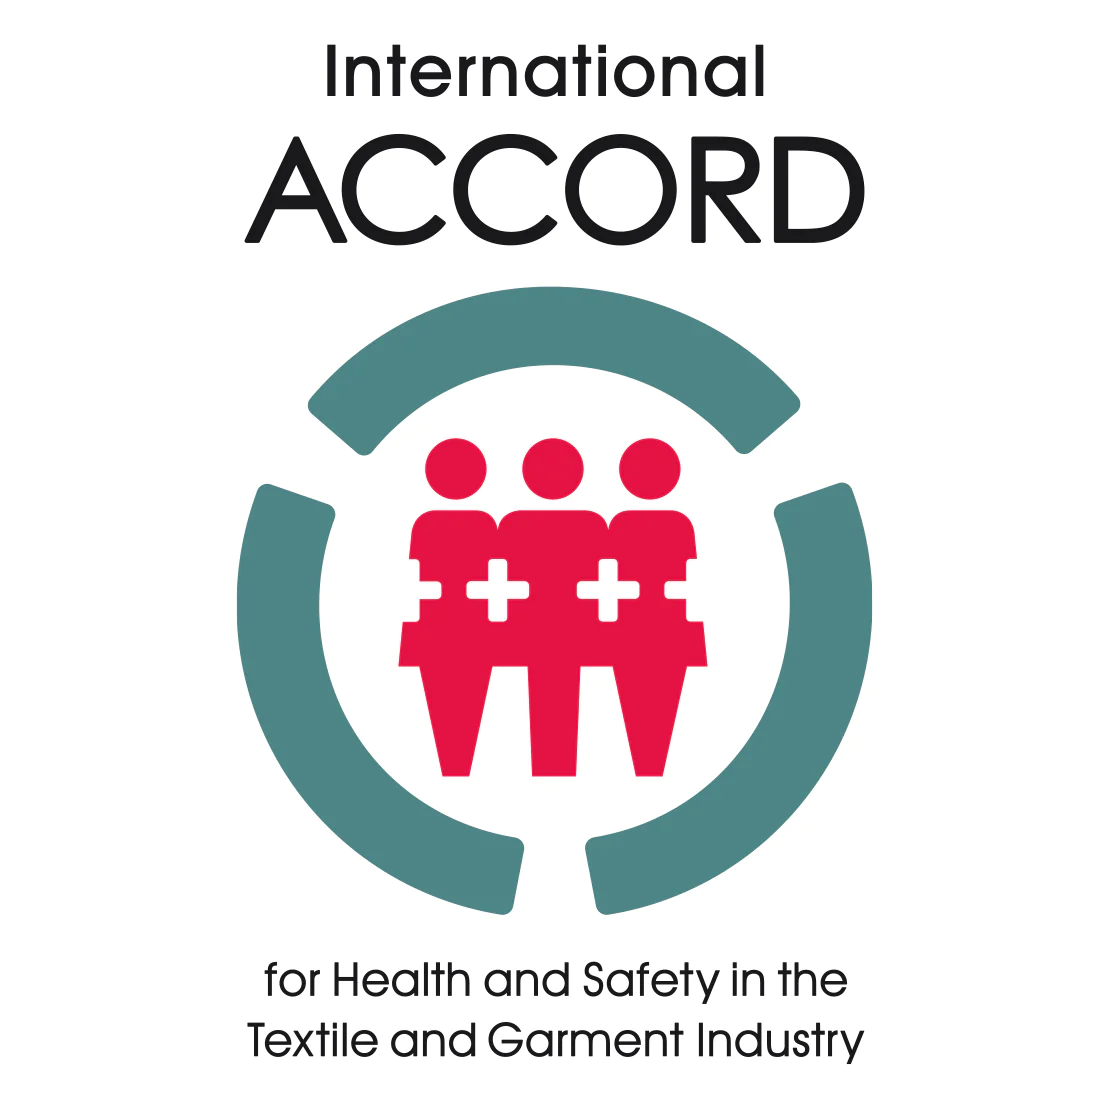 International Accord for Health and Safety in the Textile and Garment Industry cover